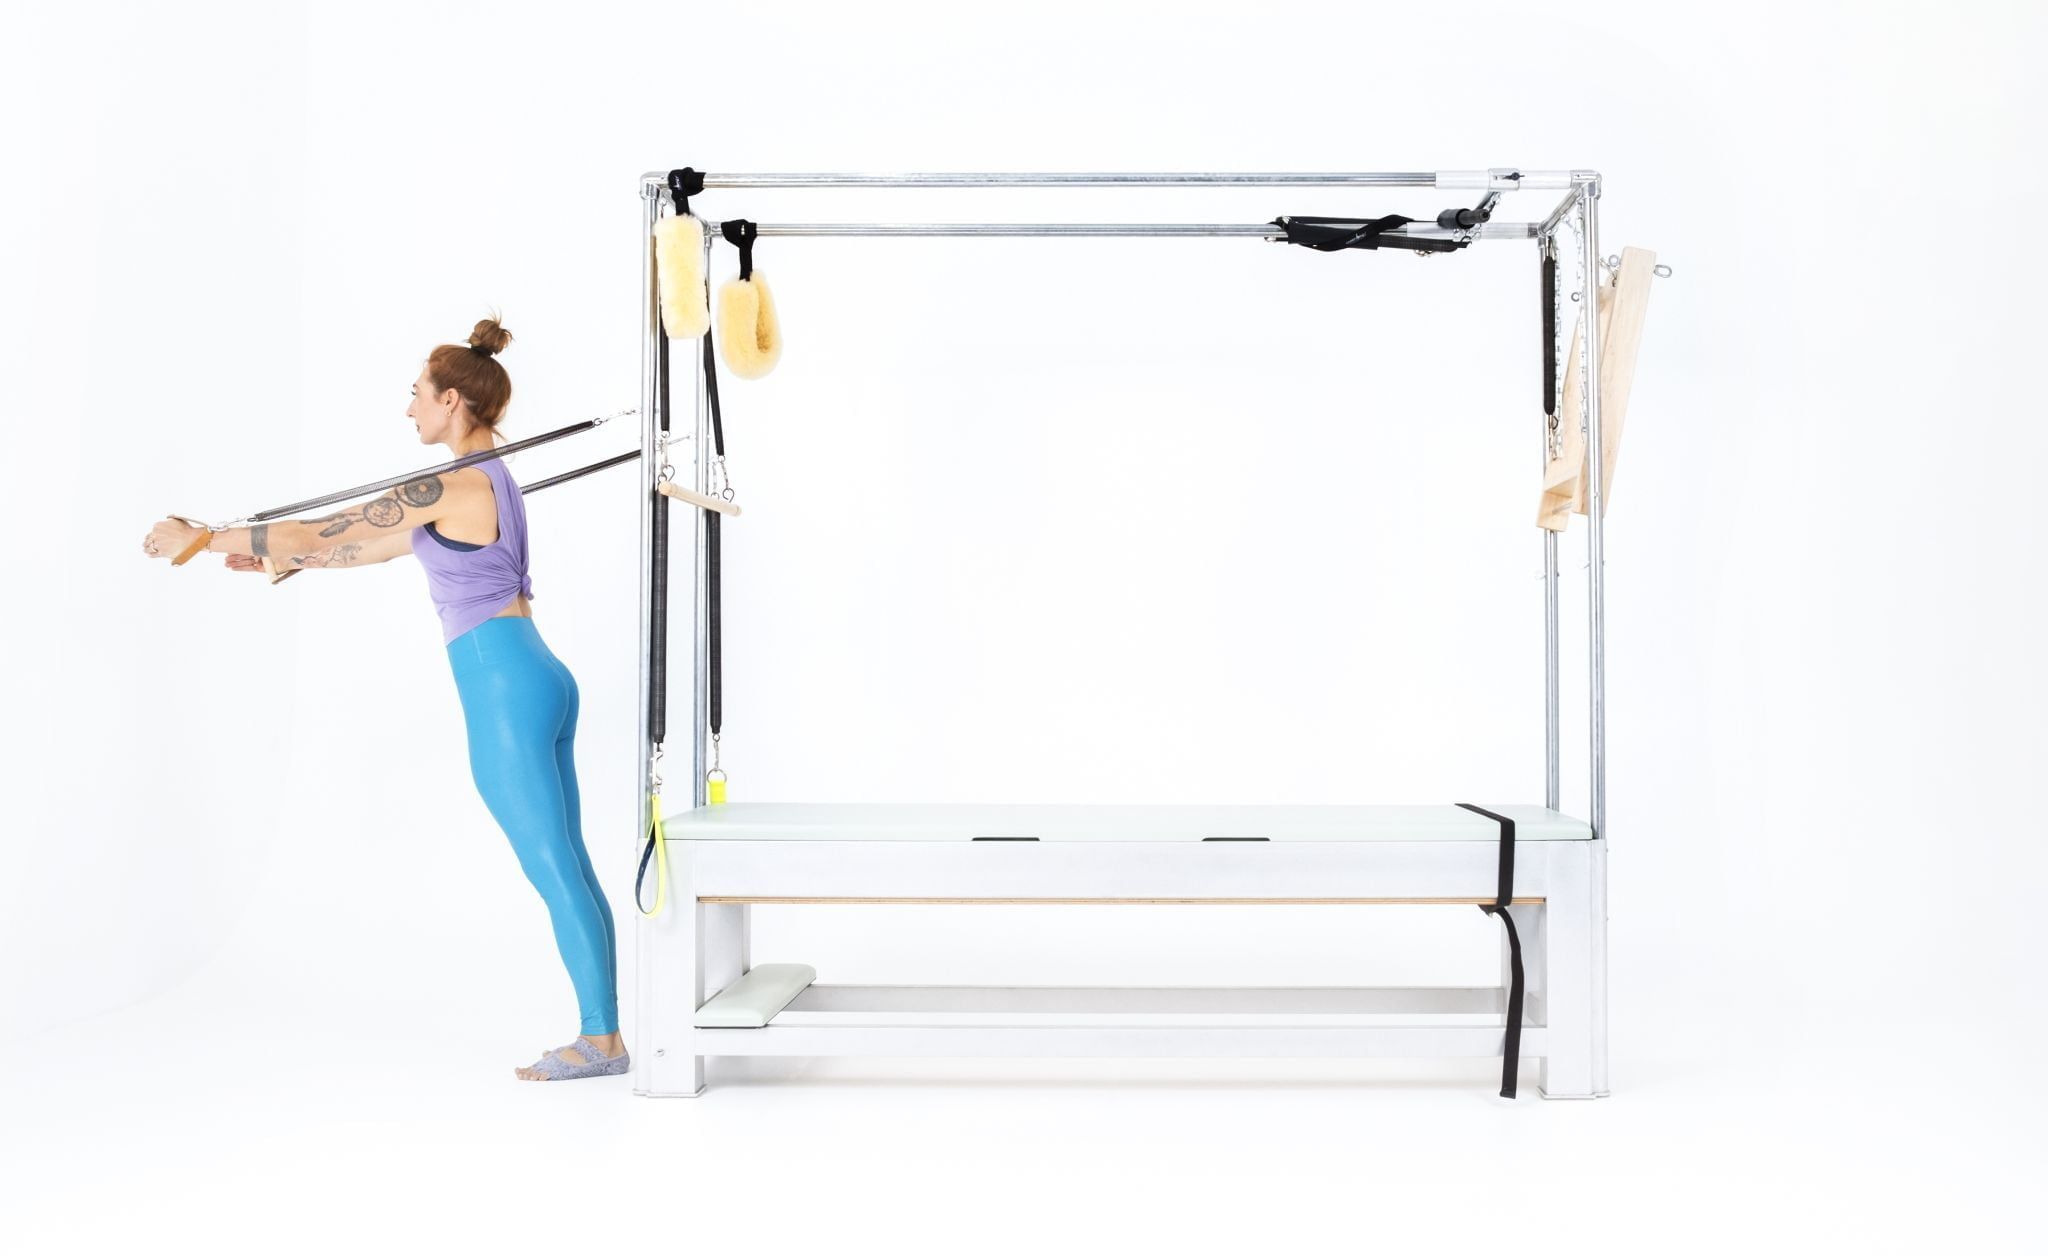 Hug-with-Standing-Arm-Springs-on-the-Cadillac-or-Tower Online Pilates Classes